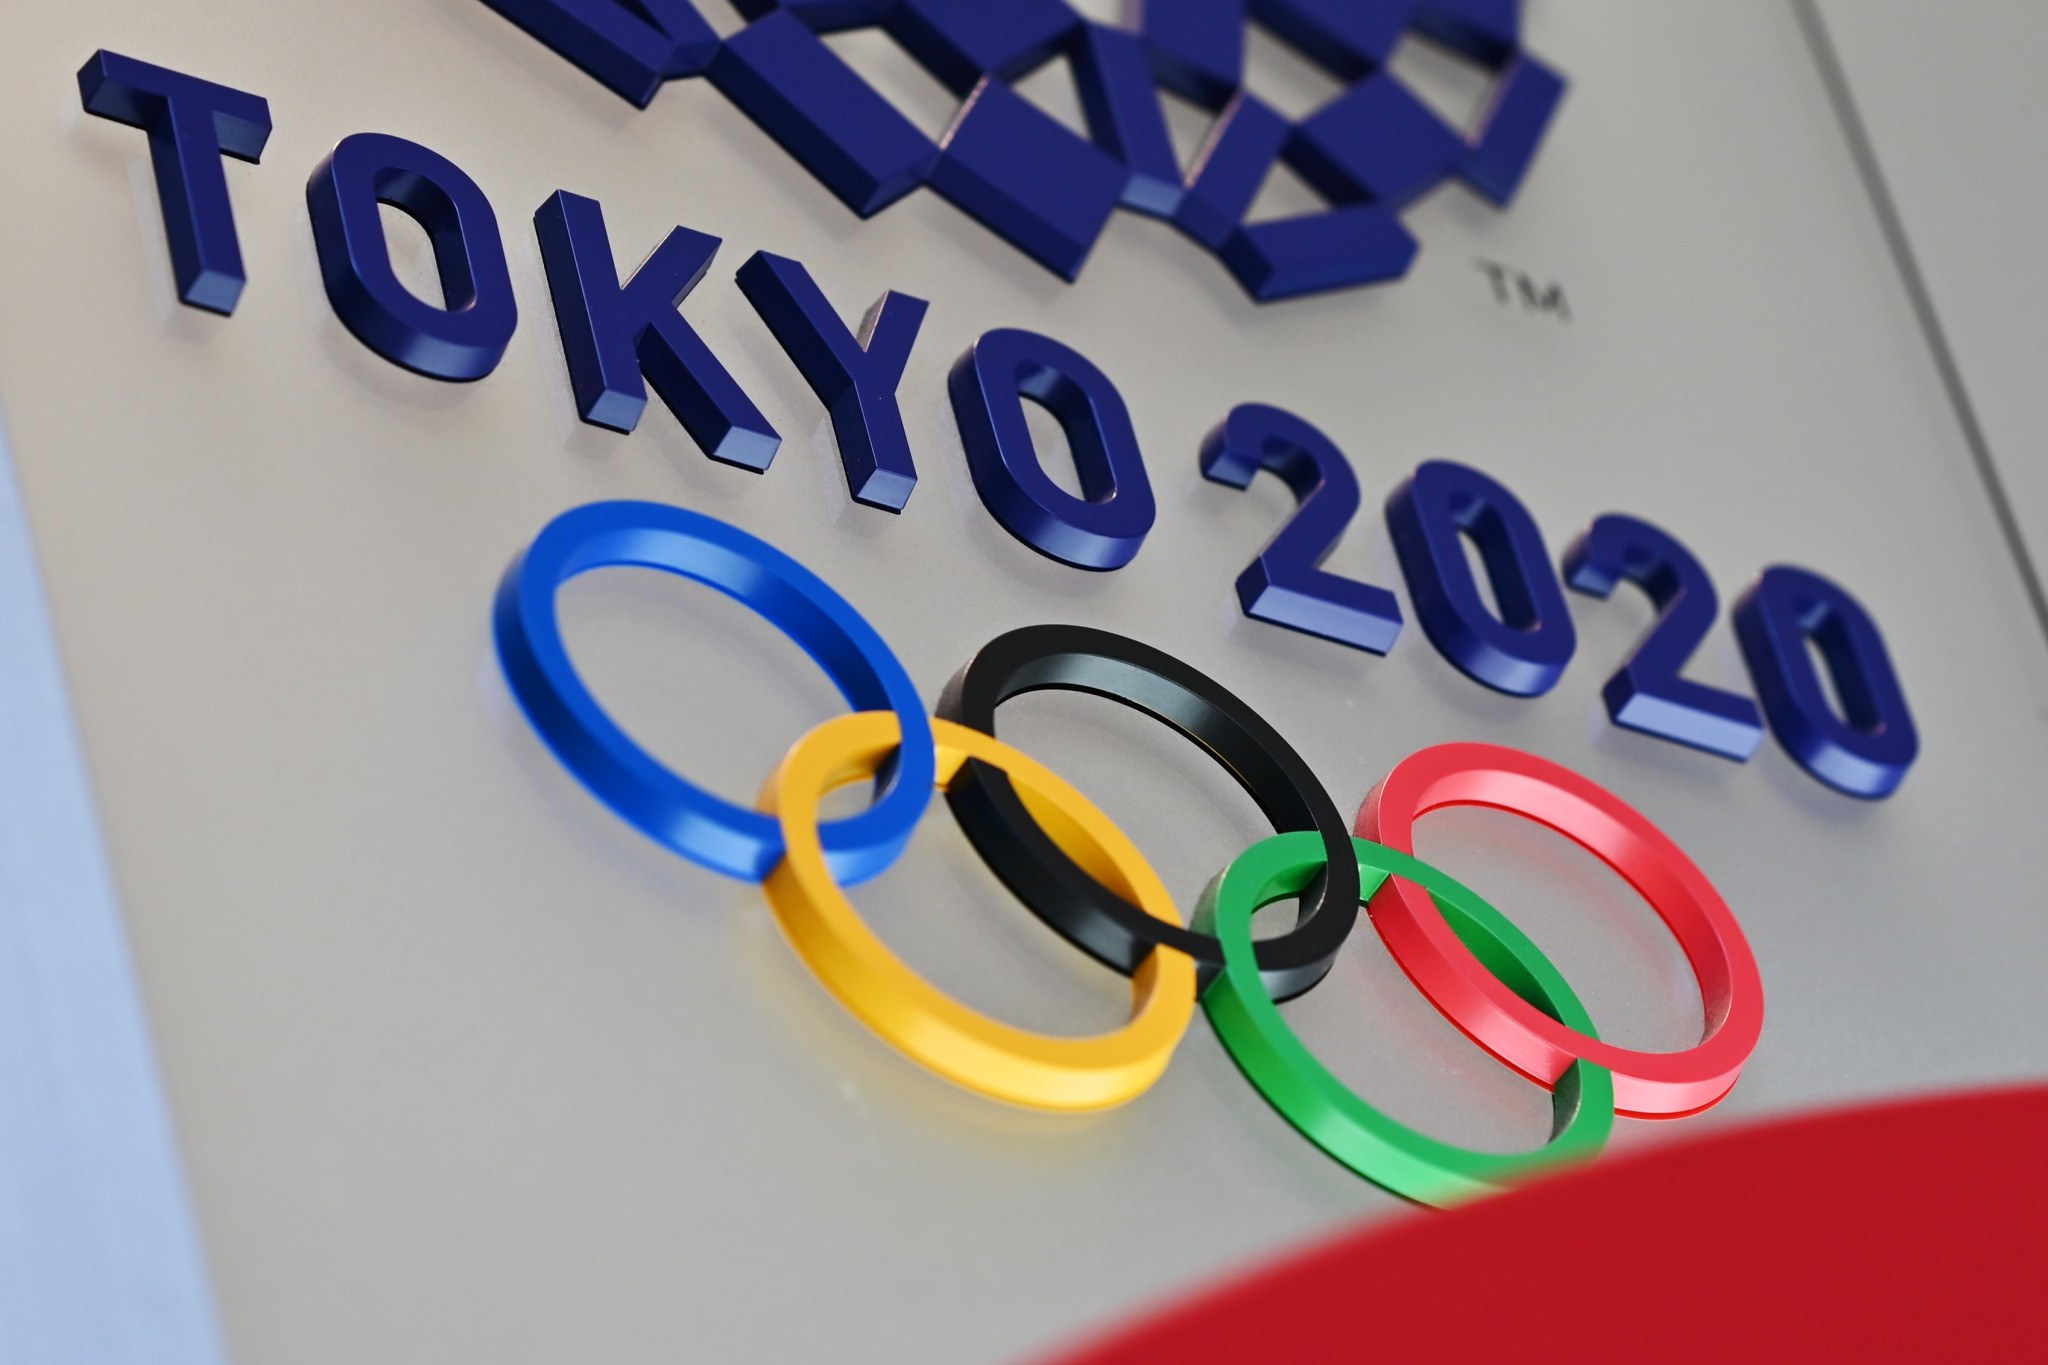 Toshirō Mutō has downplayed suggestions that October will be the decisive month in assessing if Tokyo 2020 can go ahead in 2021 ©Getty Images